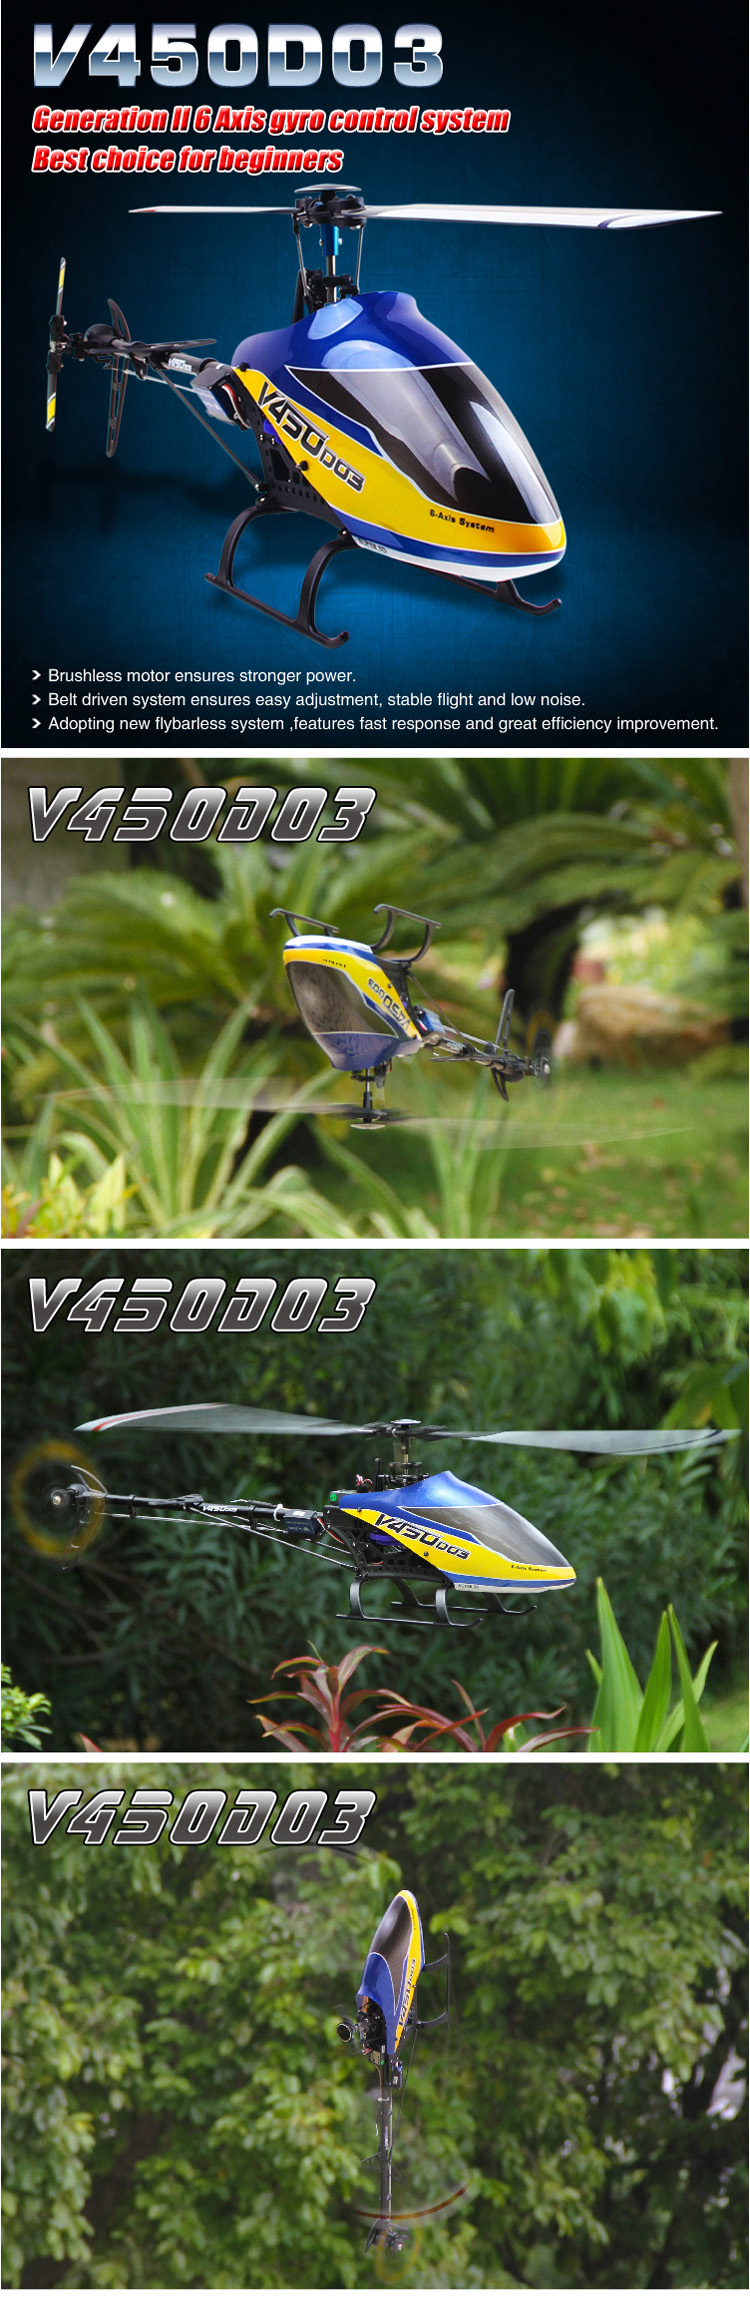 Walkera-V450D03-Generation-II-24G-6CH-6-Axis-Gyro-Brushless-RC-Helicopter-RTF-With-Devo-7-76768-2